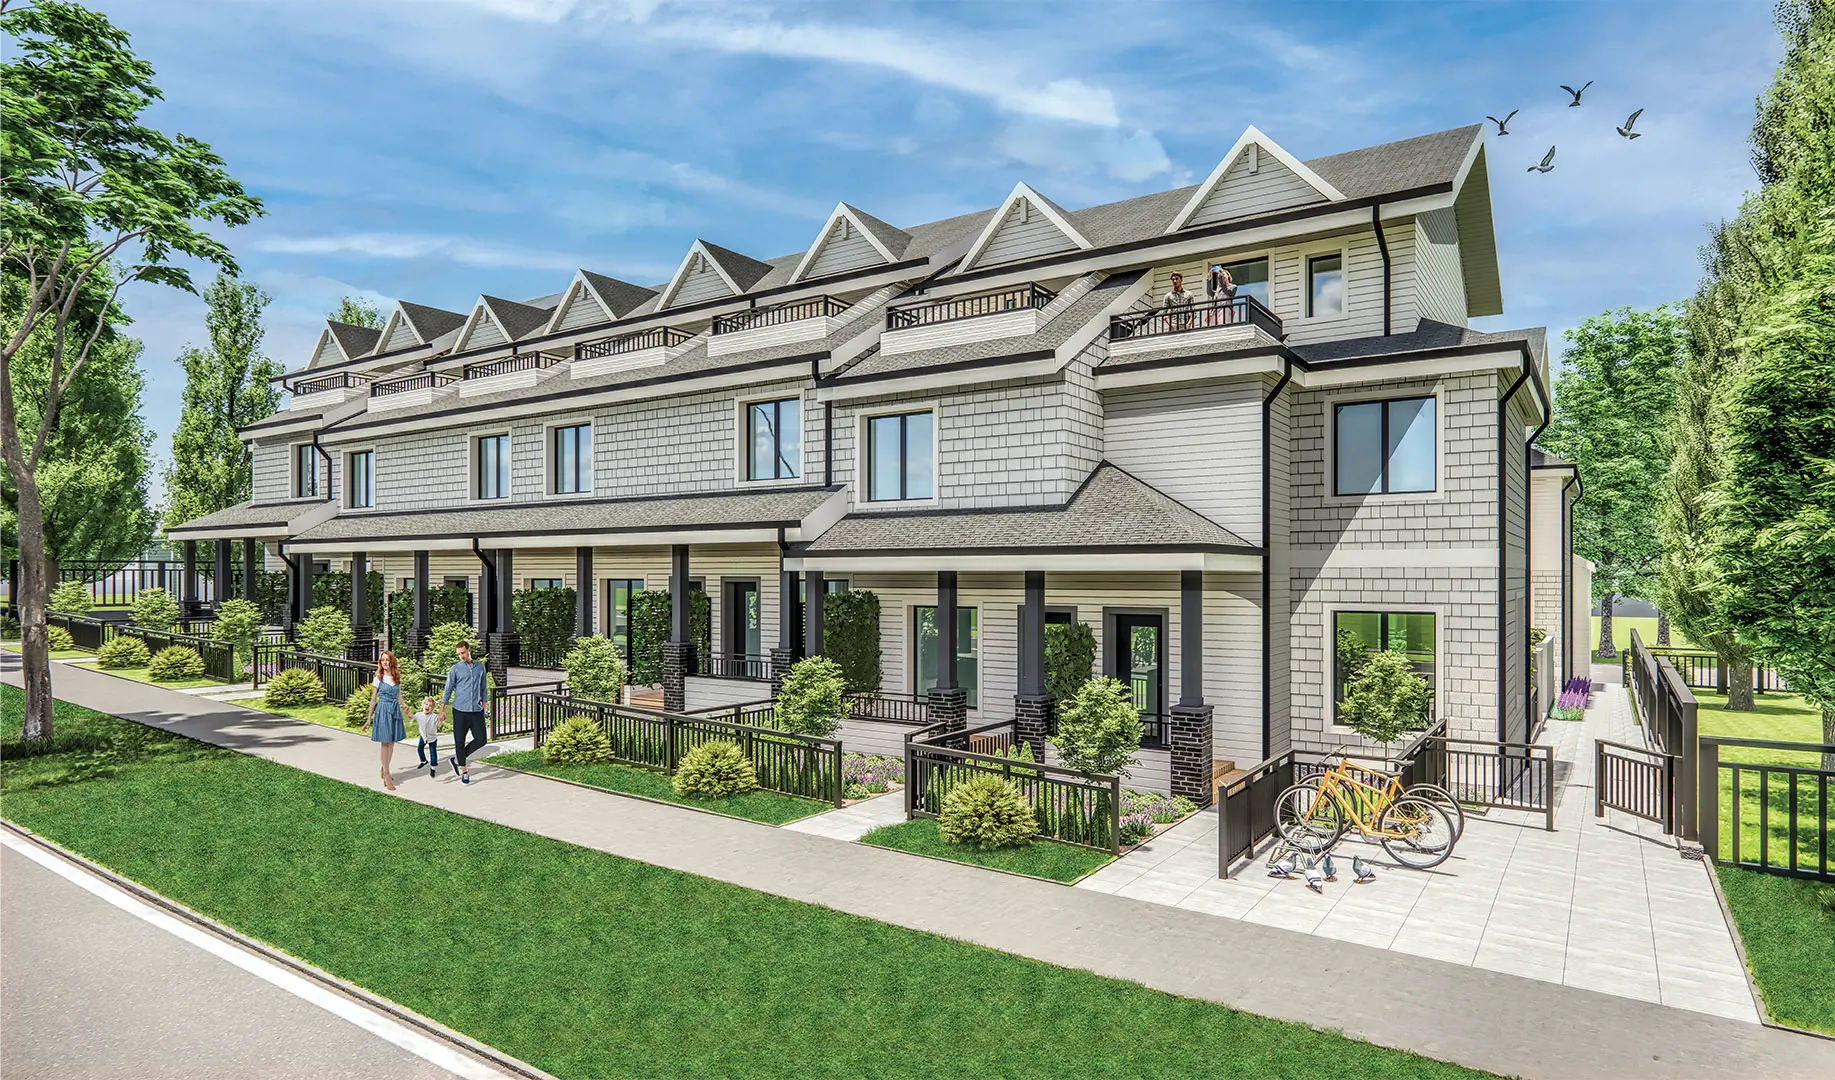 A collection of 16 Passive House townhomes in Cedar Cottage.